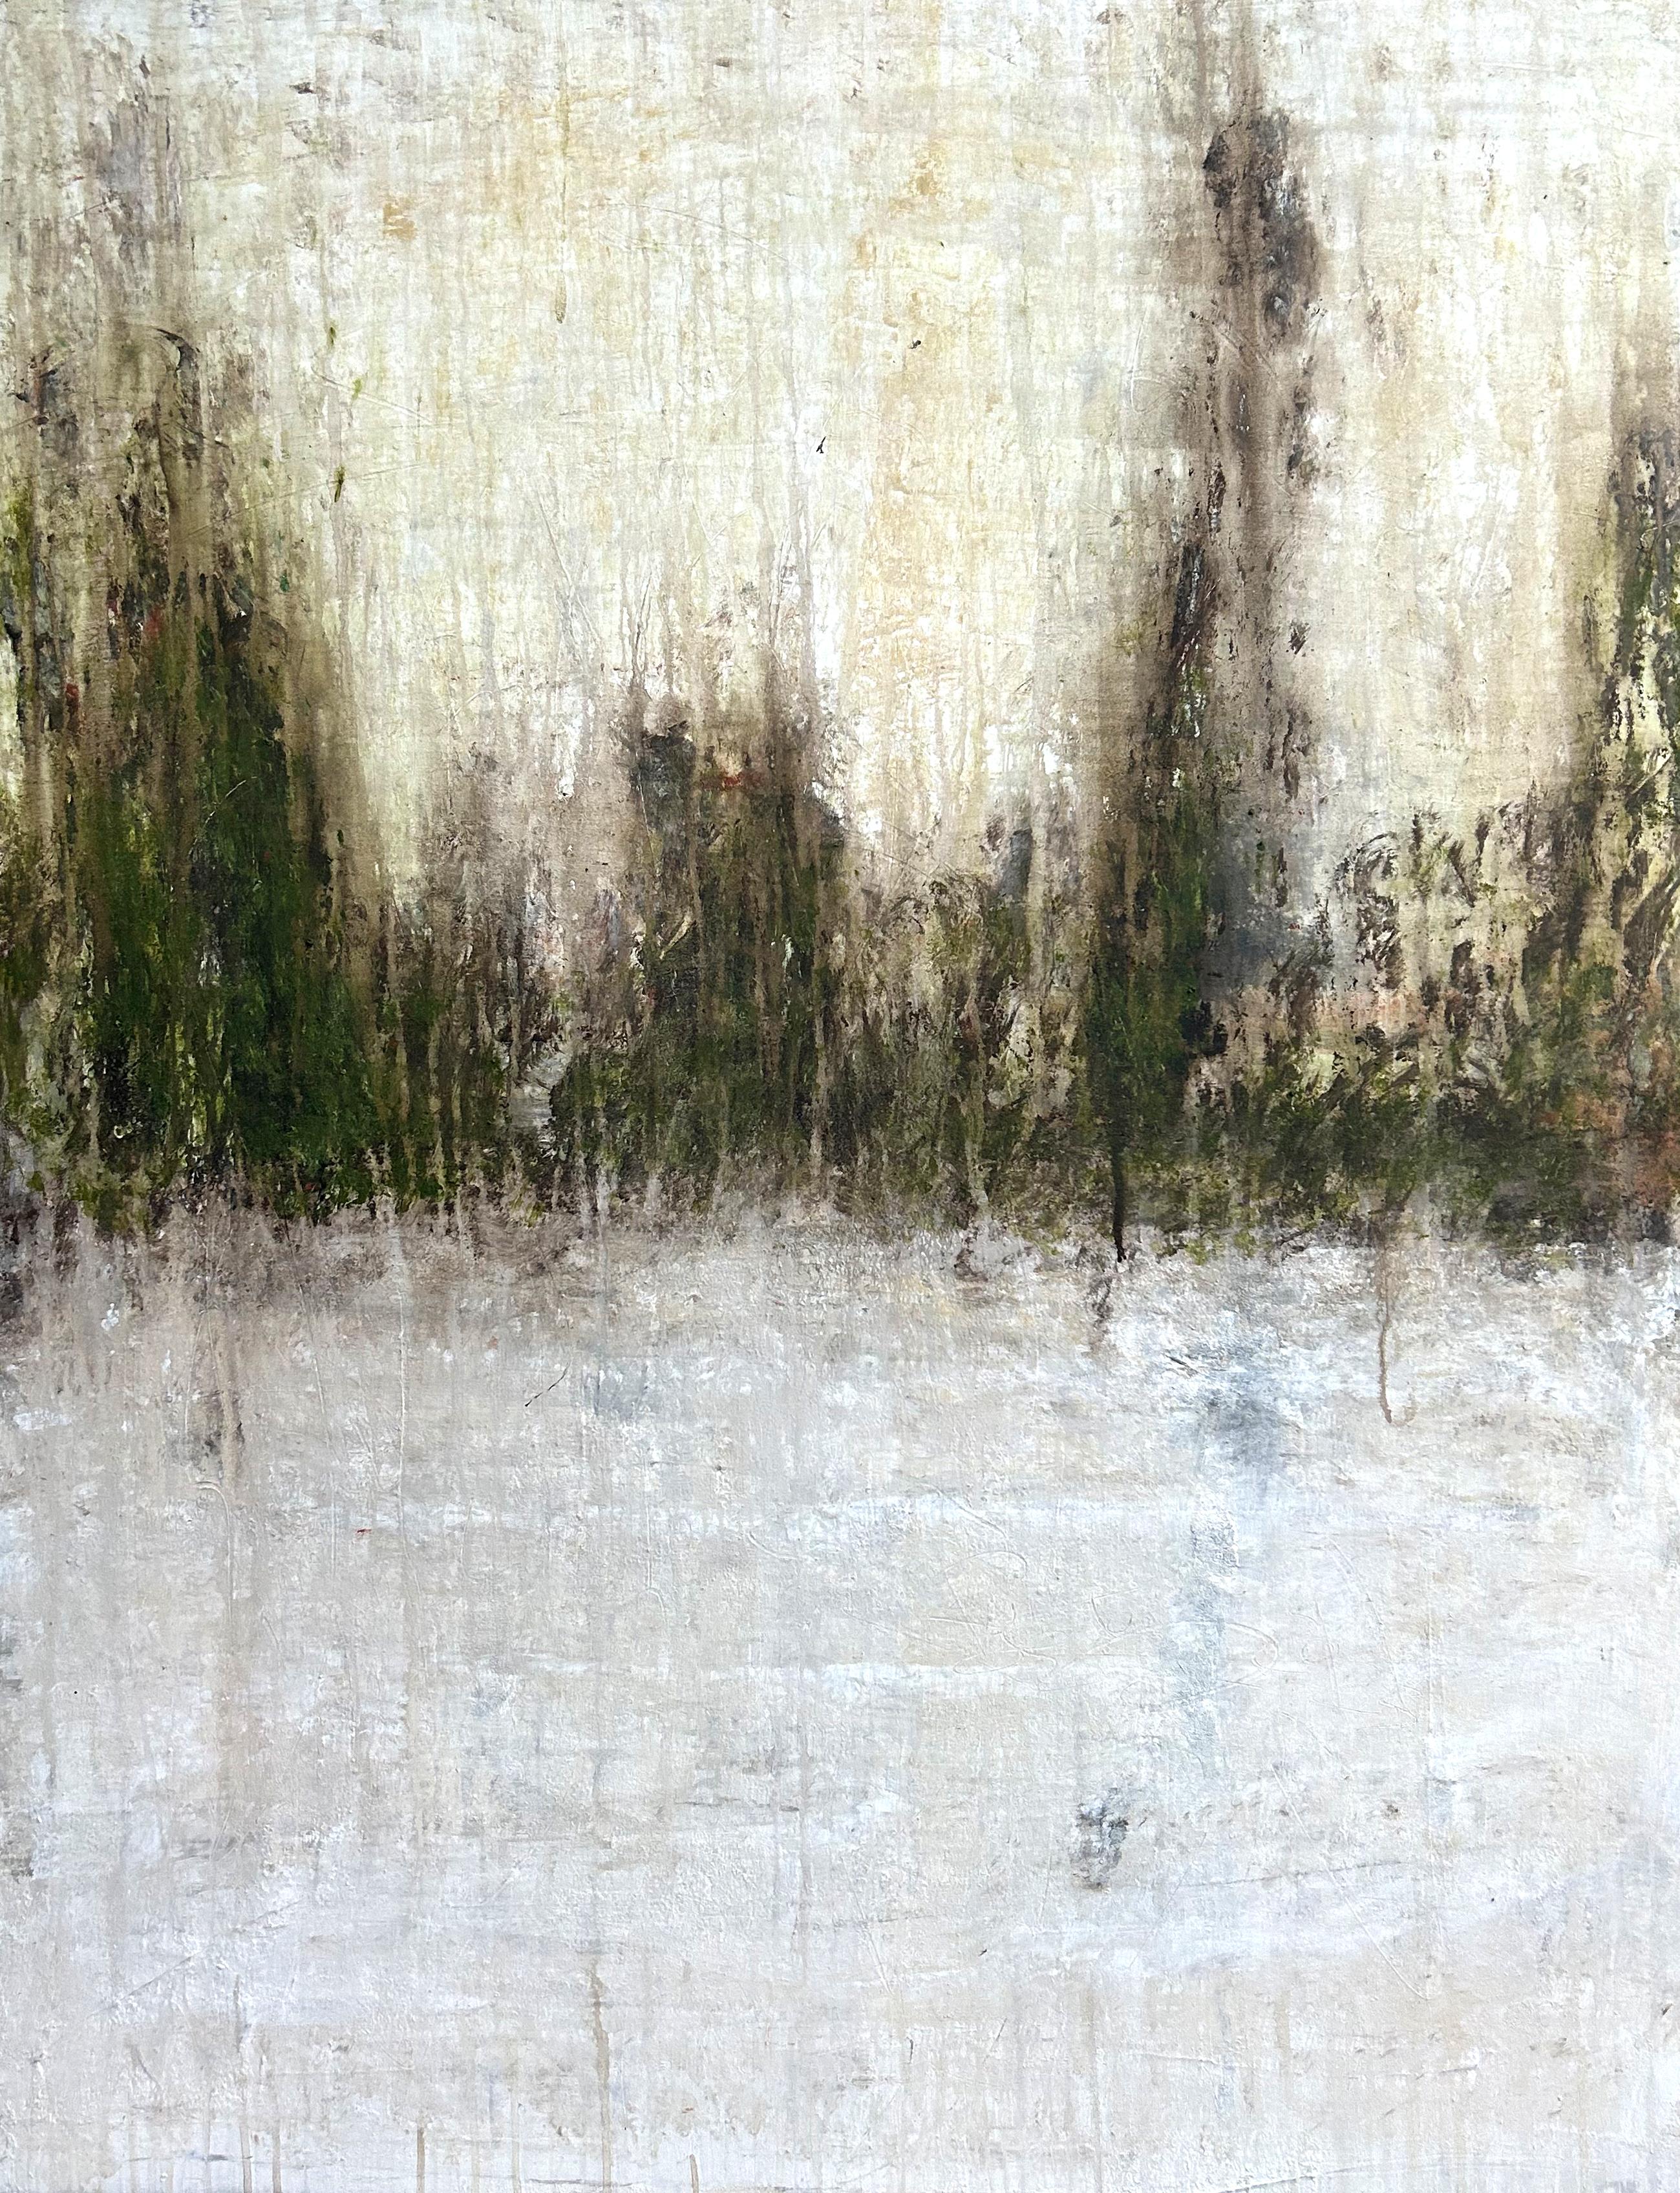 Roger König Landscape Painting - "Abstract Landscape Series" C4H8D, Abstract, 21st Century, Acrylic, Clay 